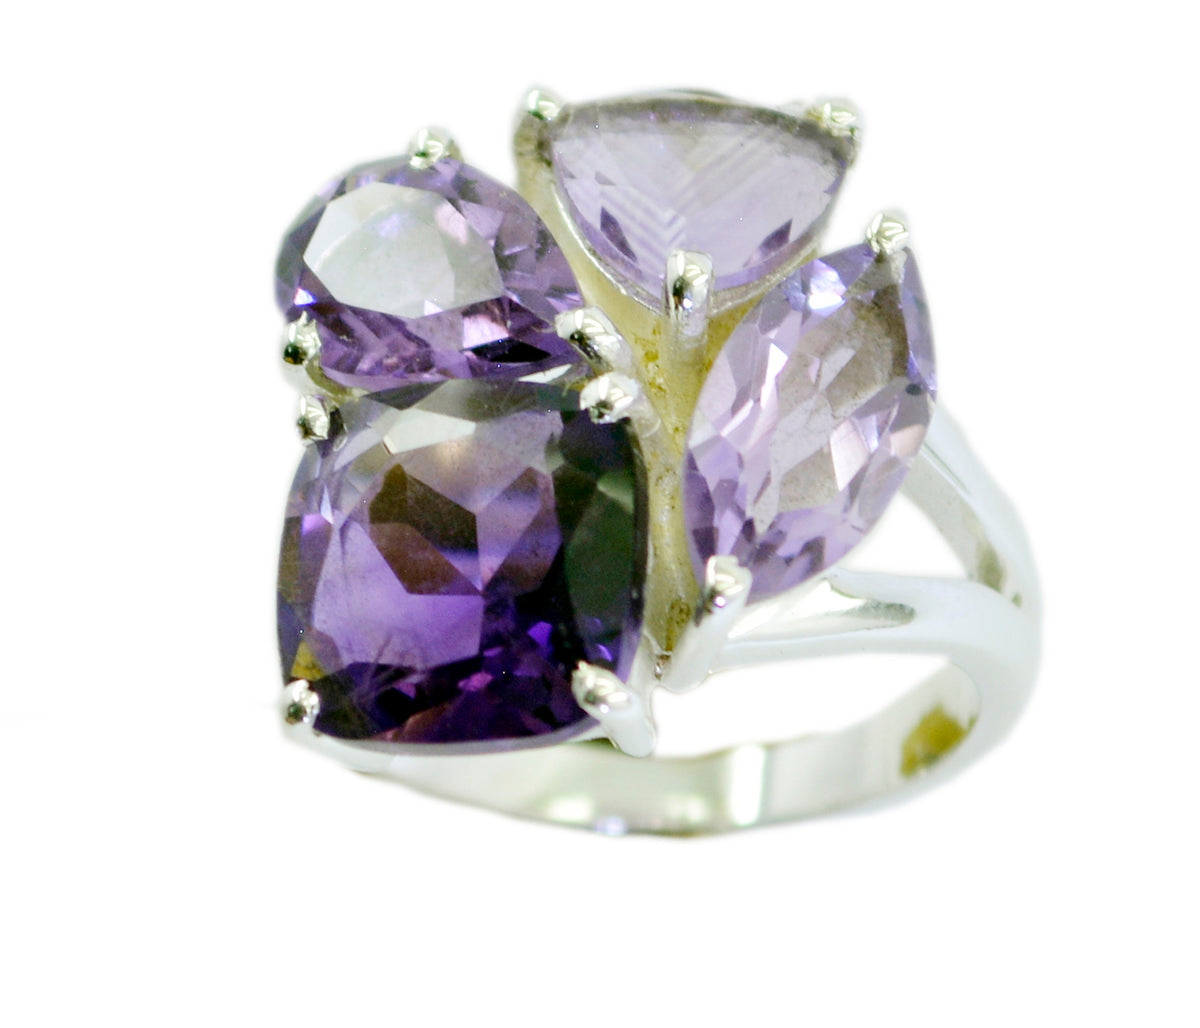 Magnificent Gemstones Amethyst Solid Silver Rings Cleaning Jewelry